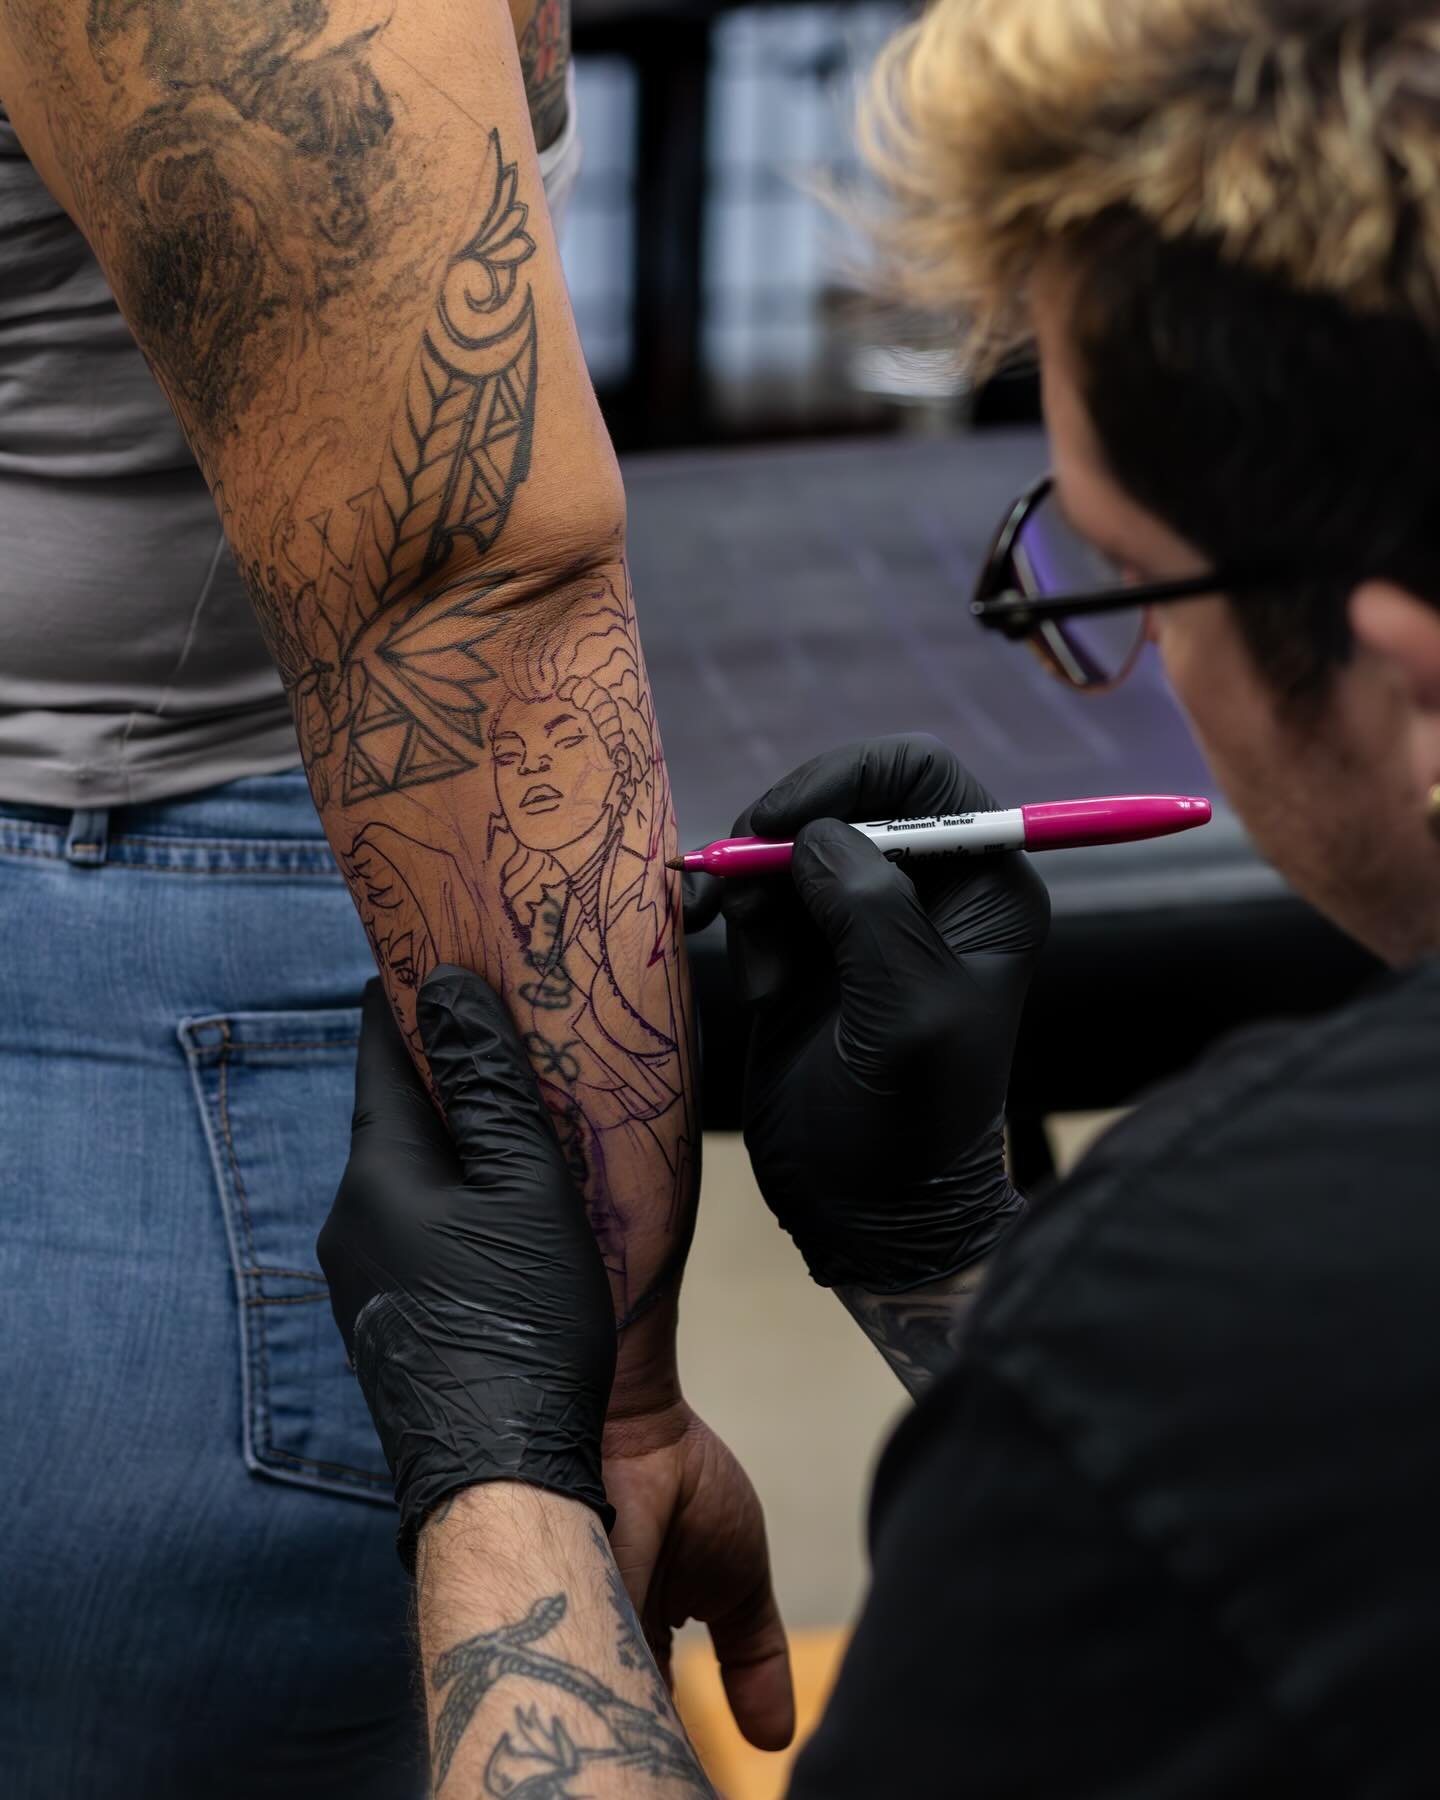 The start to a cool piece for Destiny 🔥&nbsp;This X-Men Sleeve is going to be so dope once it&rsquo;s finished 🥵

Let @briansvenikershay tattoo something big, custom, and bold on you 😮&zwj;💨 Our shop is located 5 minutes away from Kalapaki Beach 